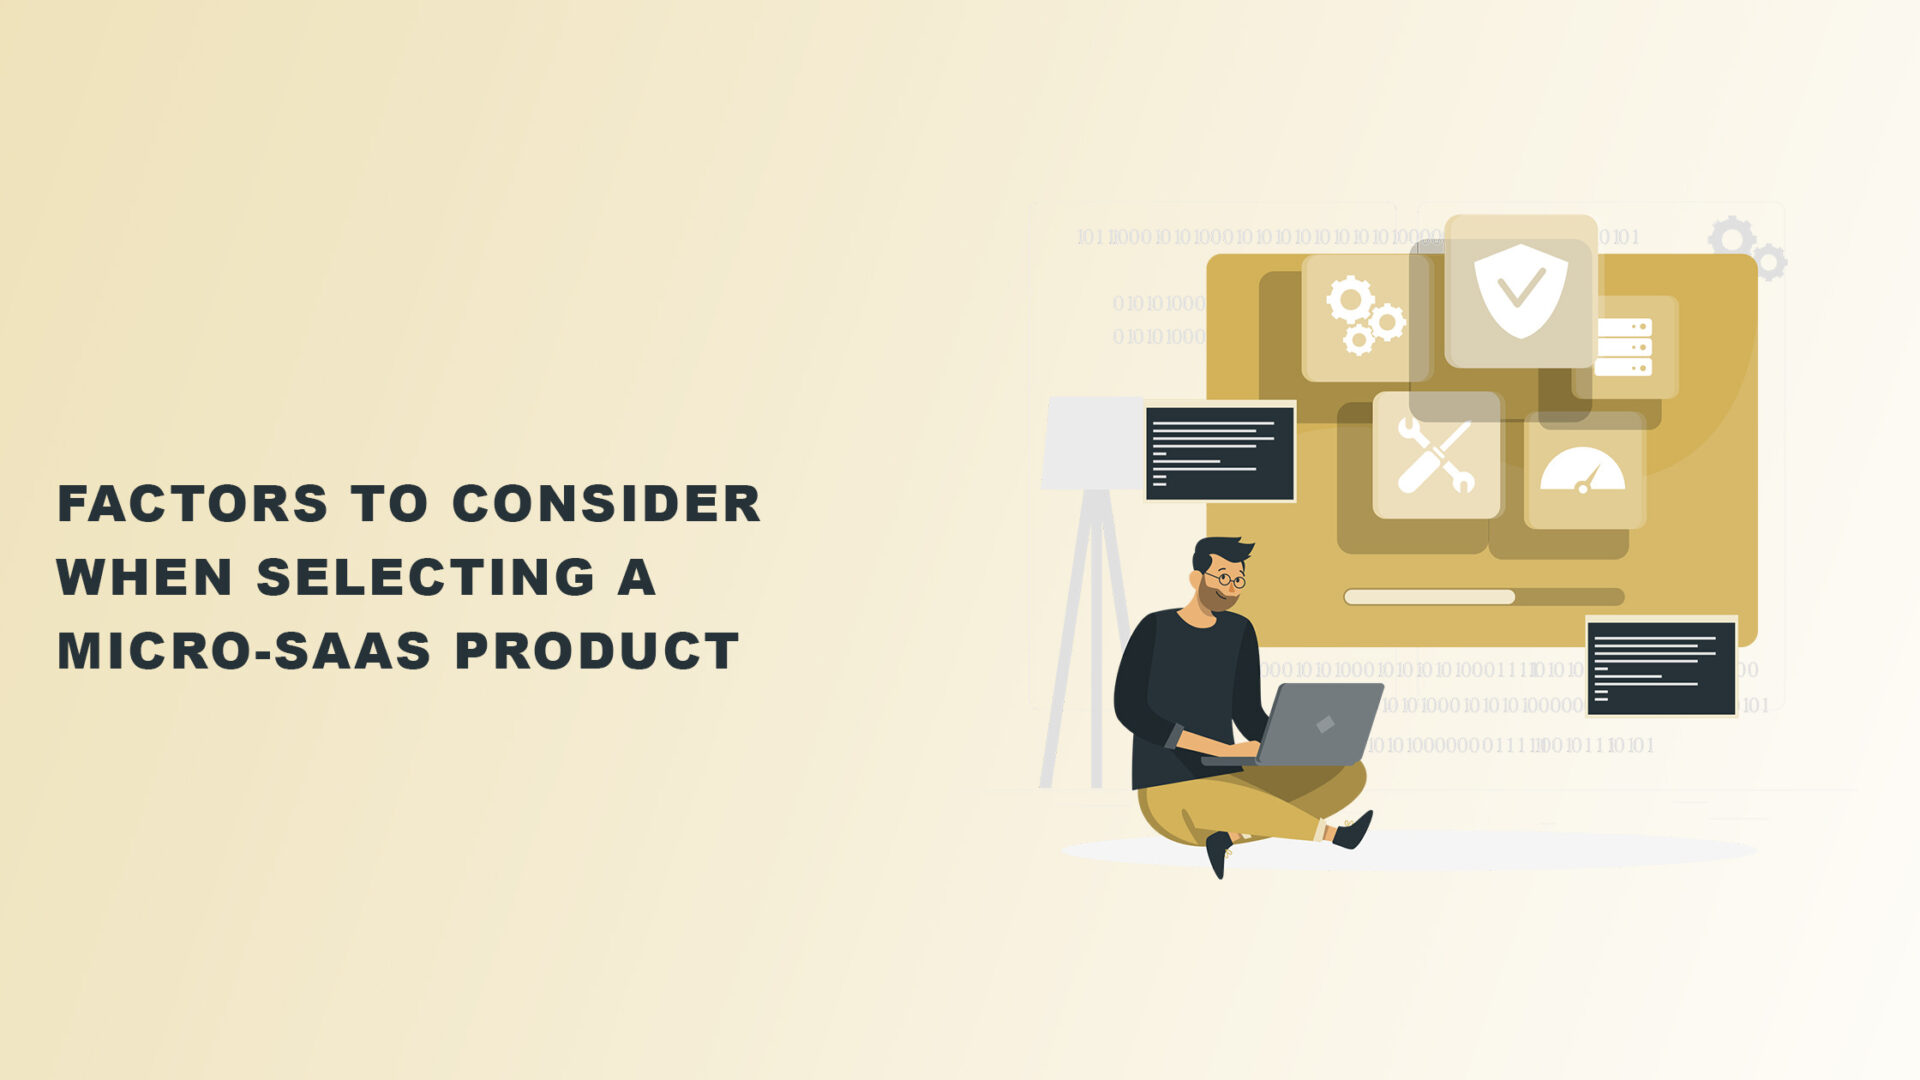 Factors to Consider When Selecting a Micro-SaaS Product